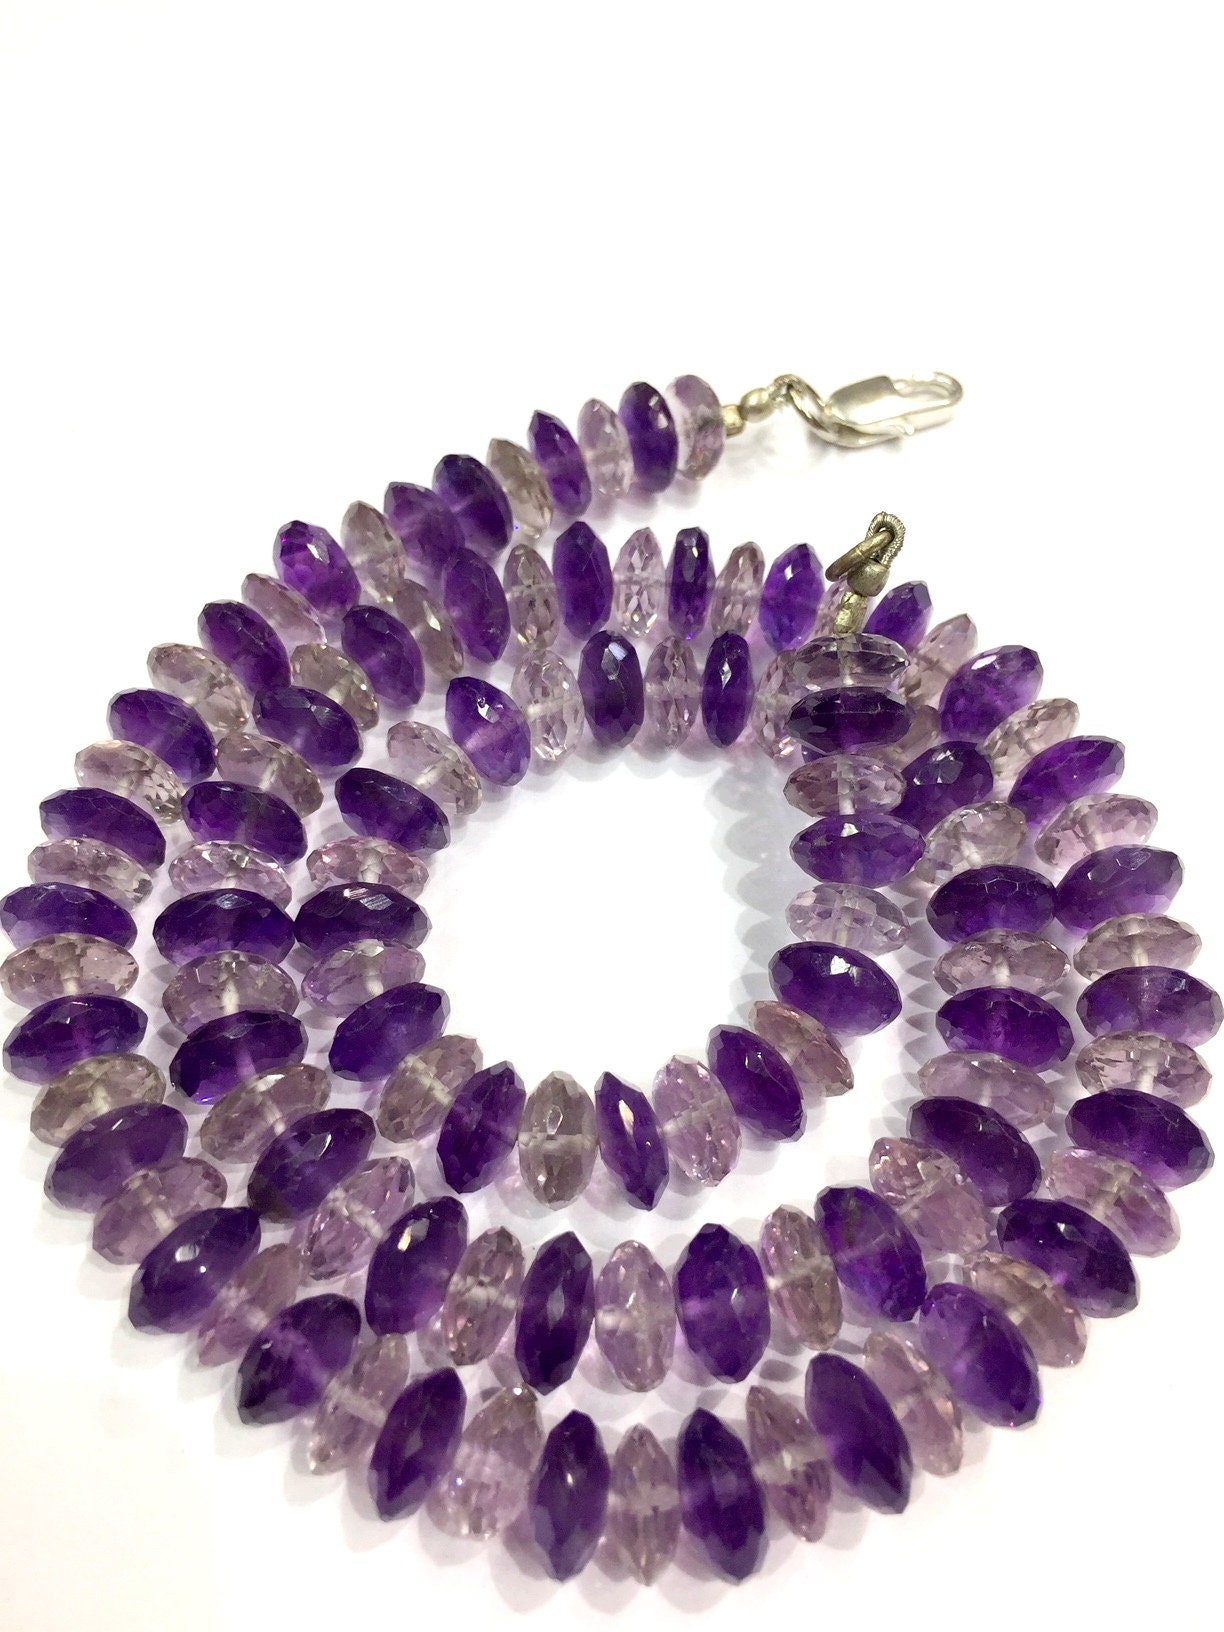 Superb Qualitynatural Amethyst Faceted Rondelle Beads - Etsy